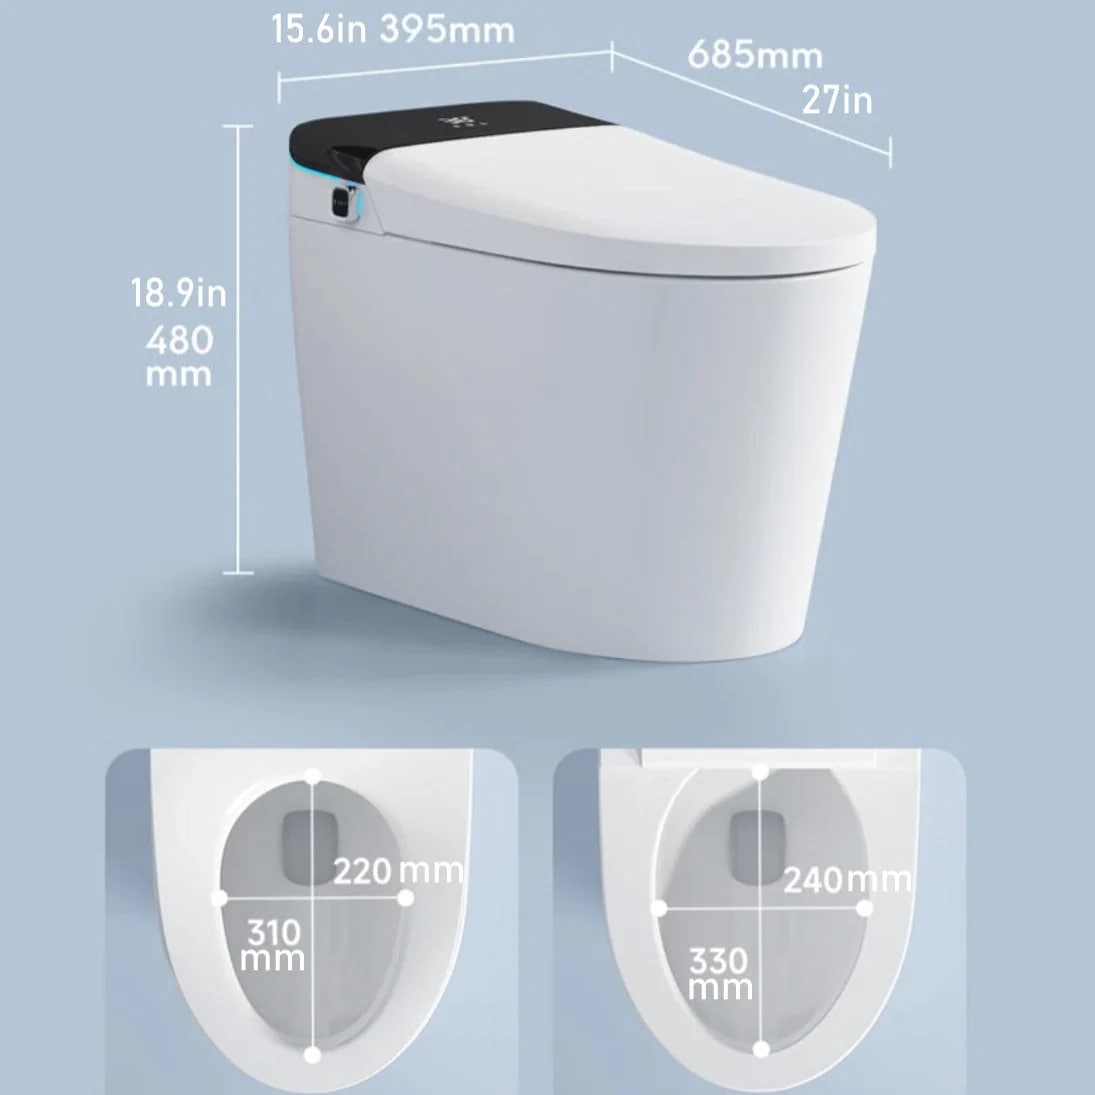 Smart Toilet with Automated Features